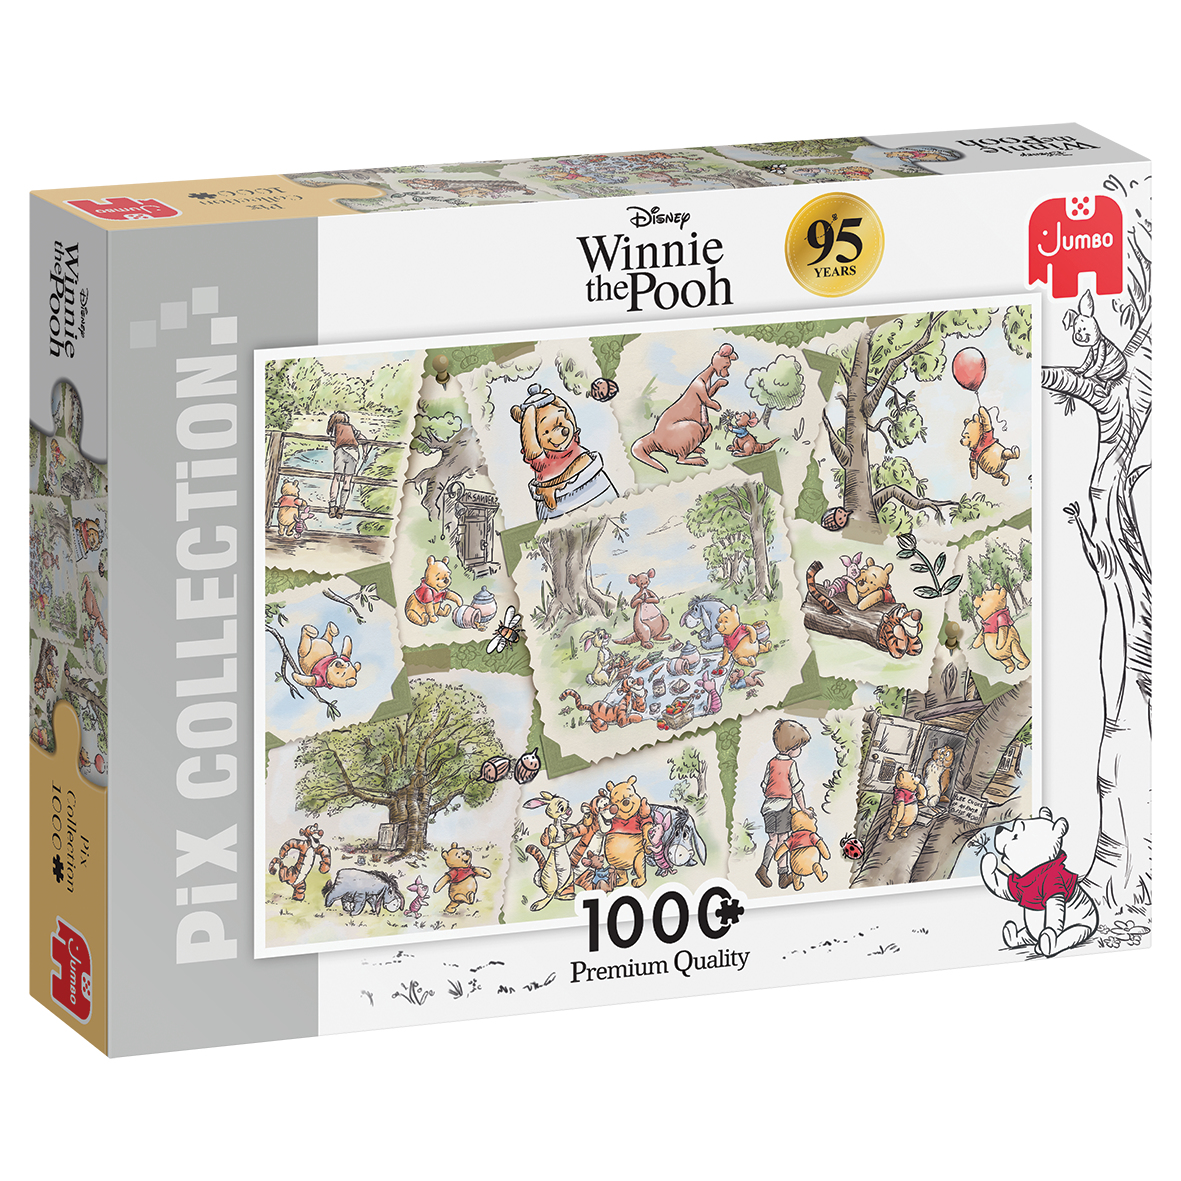 JUMBO Disney Classic Collection Mehrfarbig - Pooh the Puzzle Teile Anniversary Winnie 95th 1000